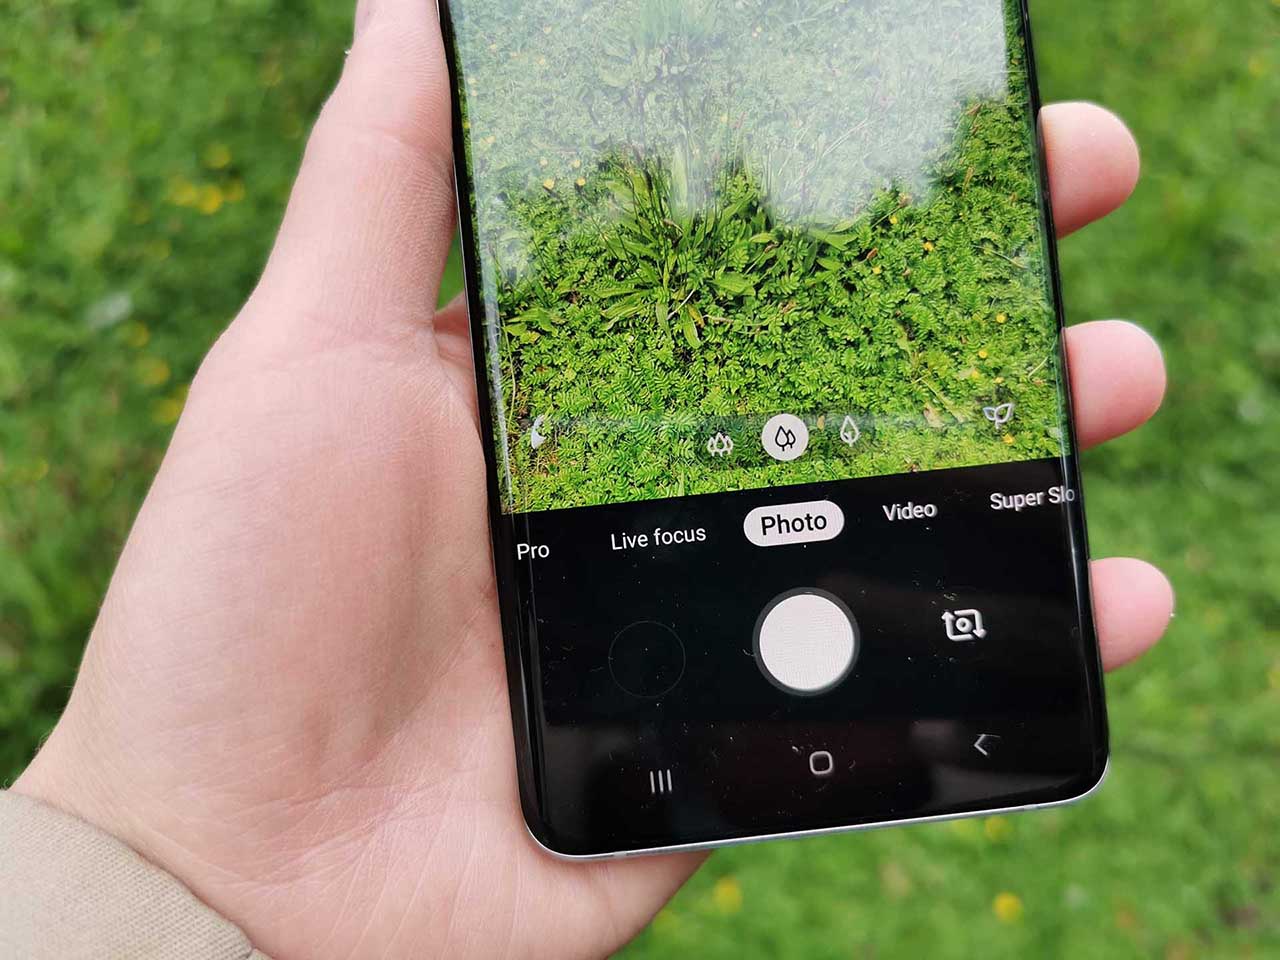 Samsung Galaxy S10 Plus camera review: Features